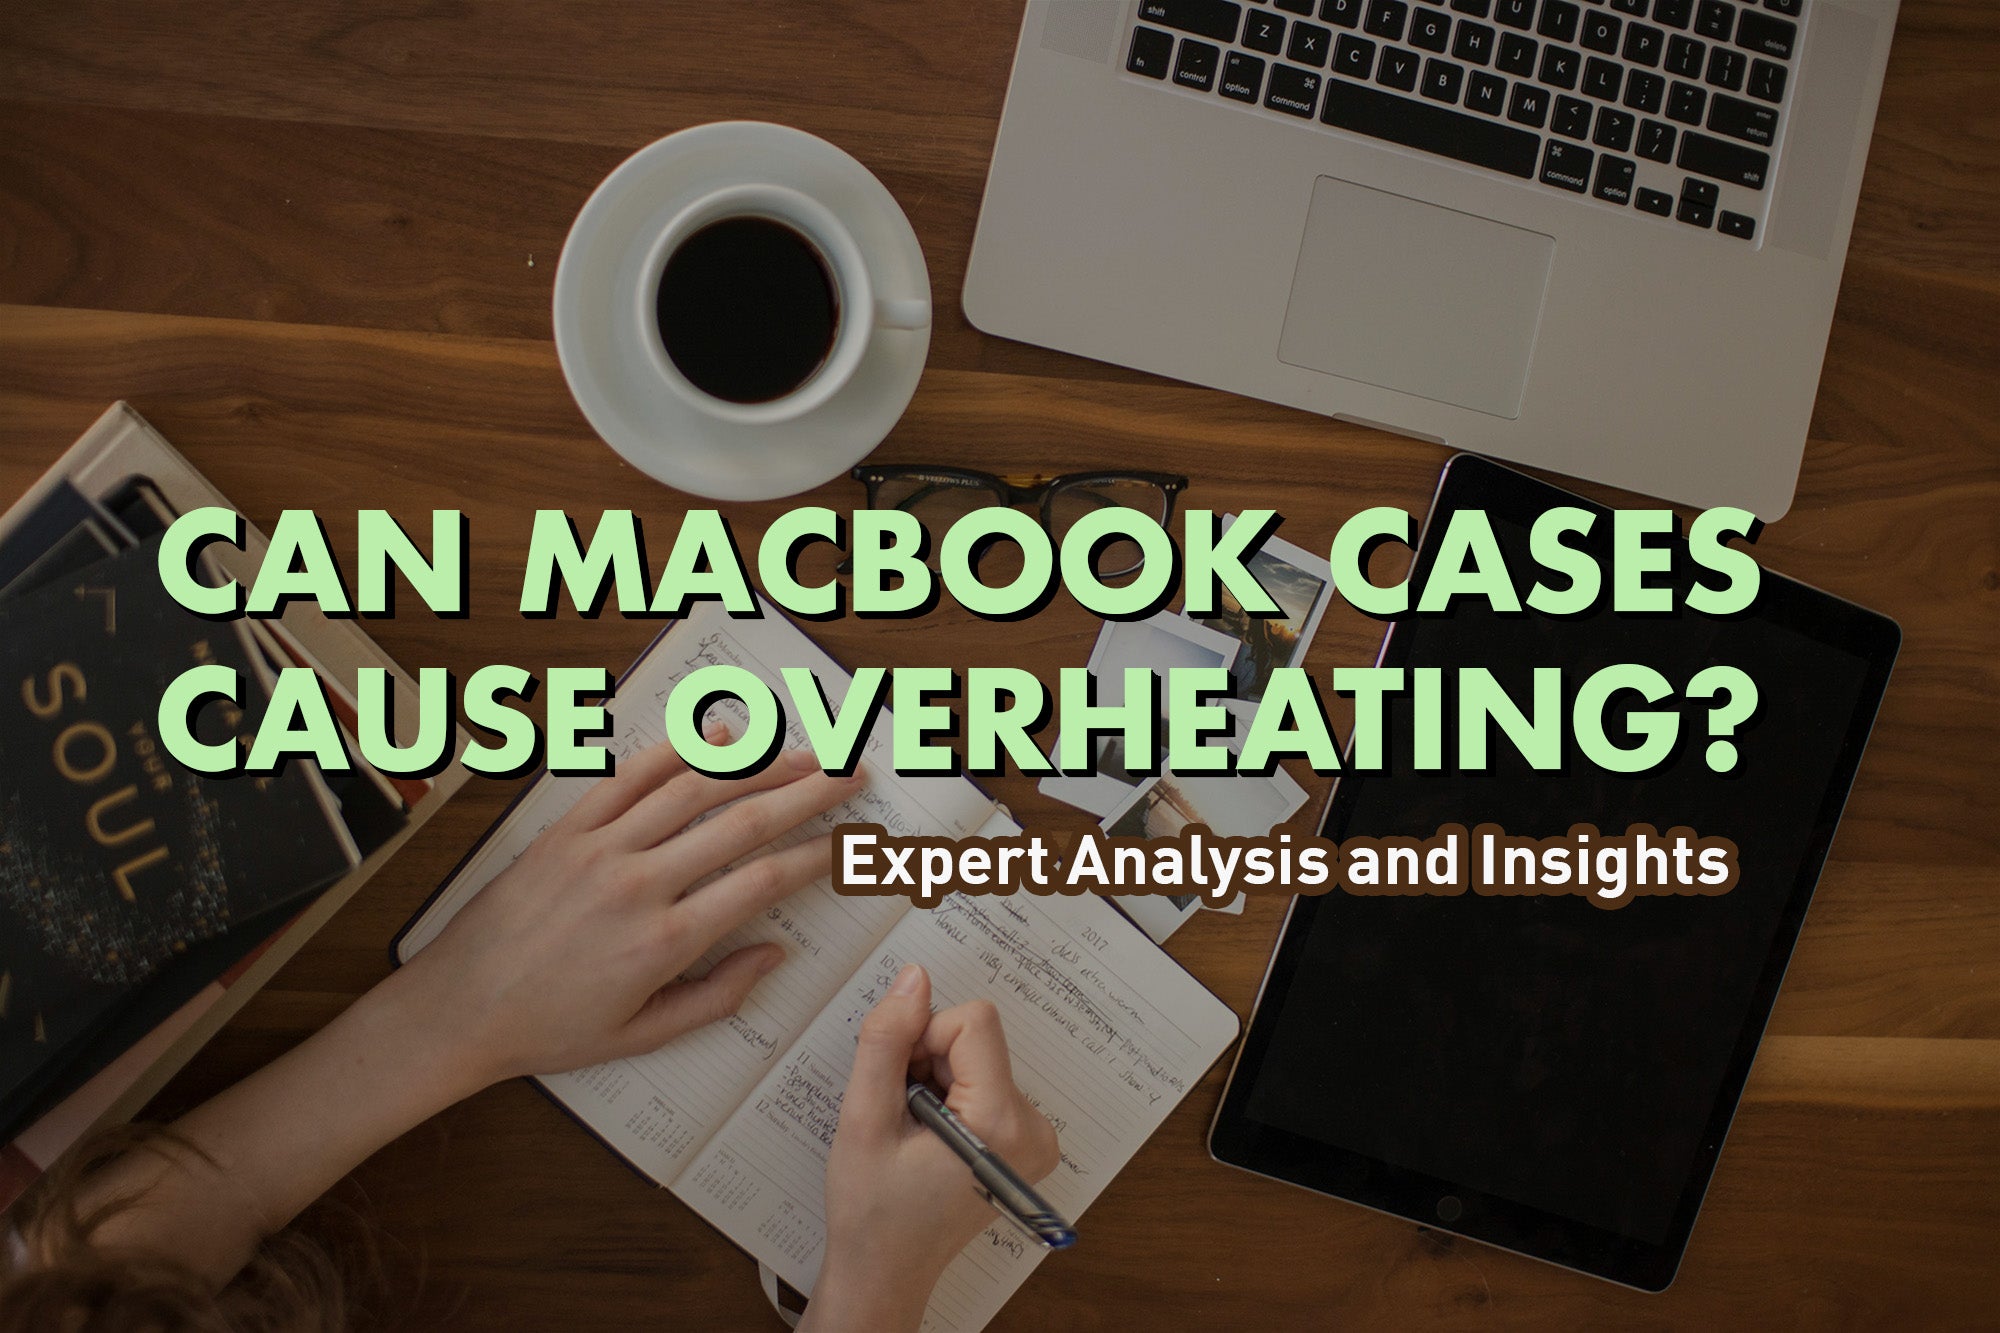 Can MacBook Cases Cause Overheating?